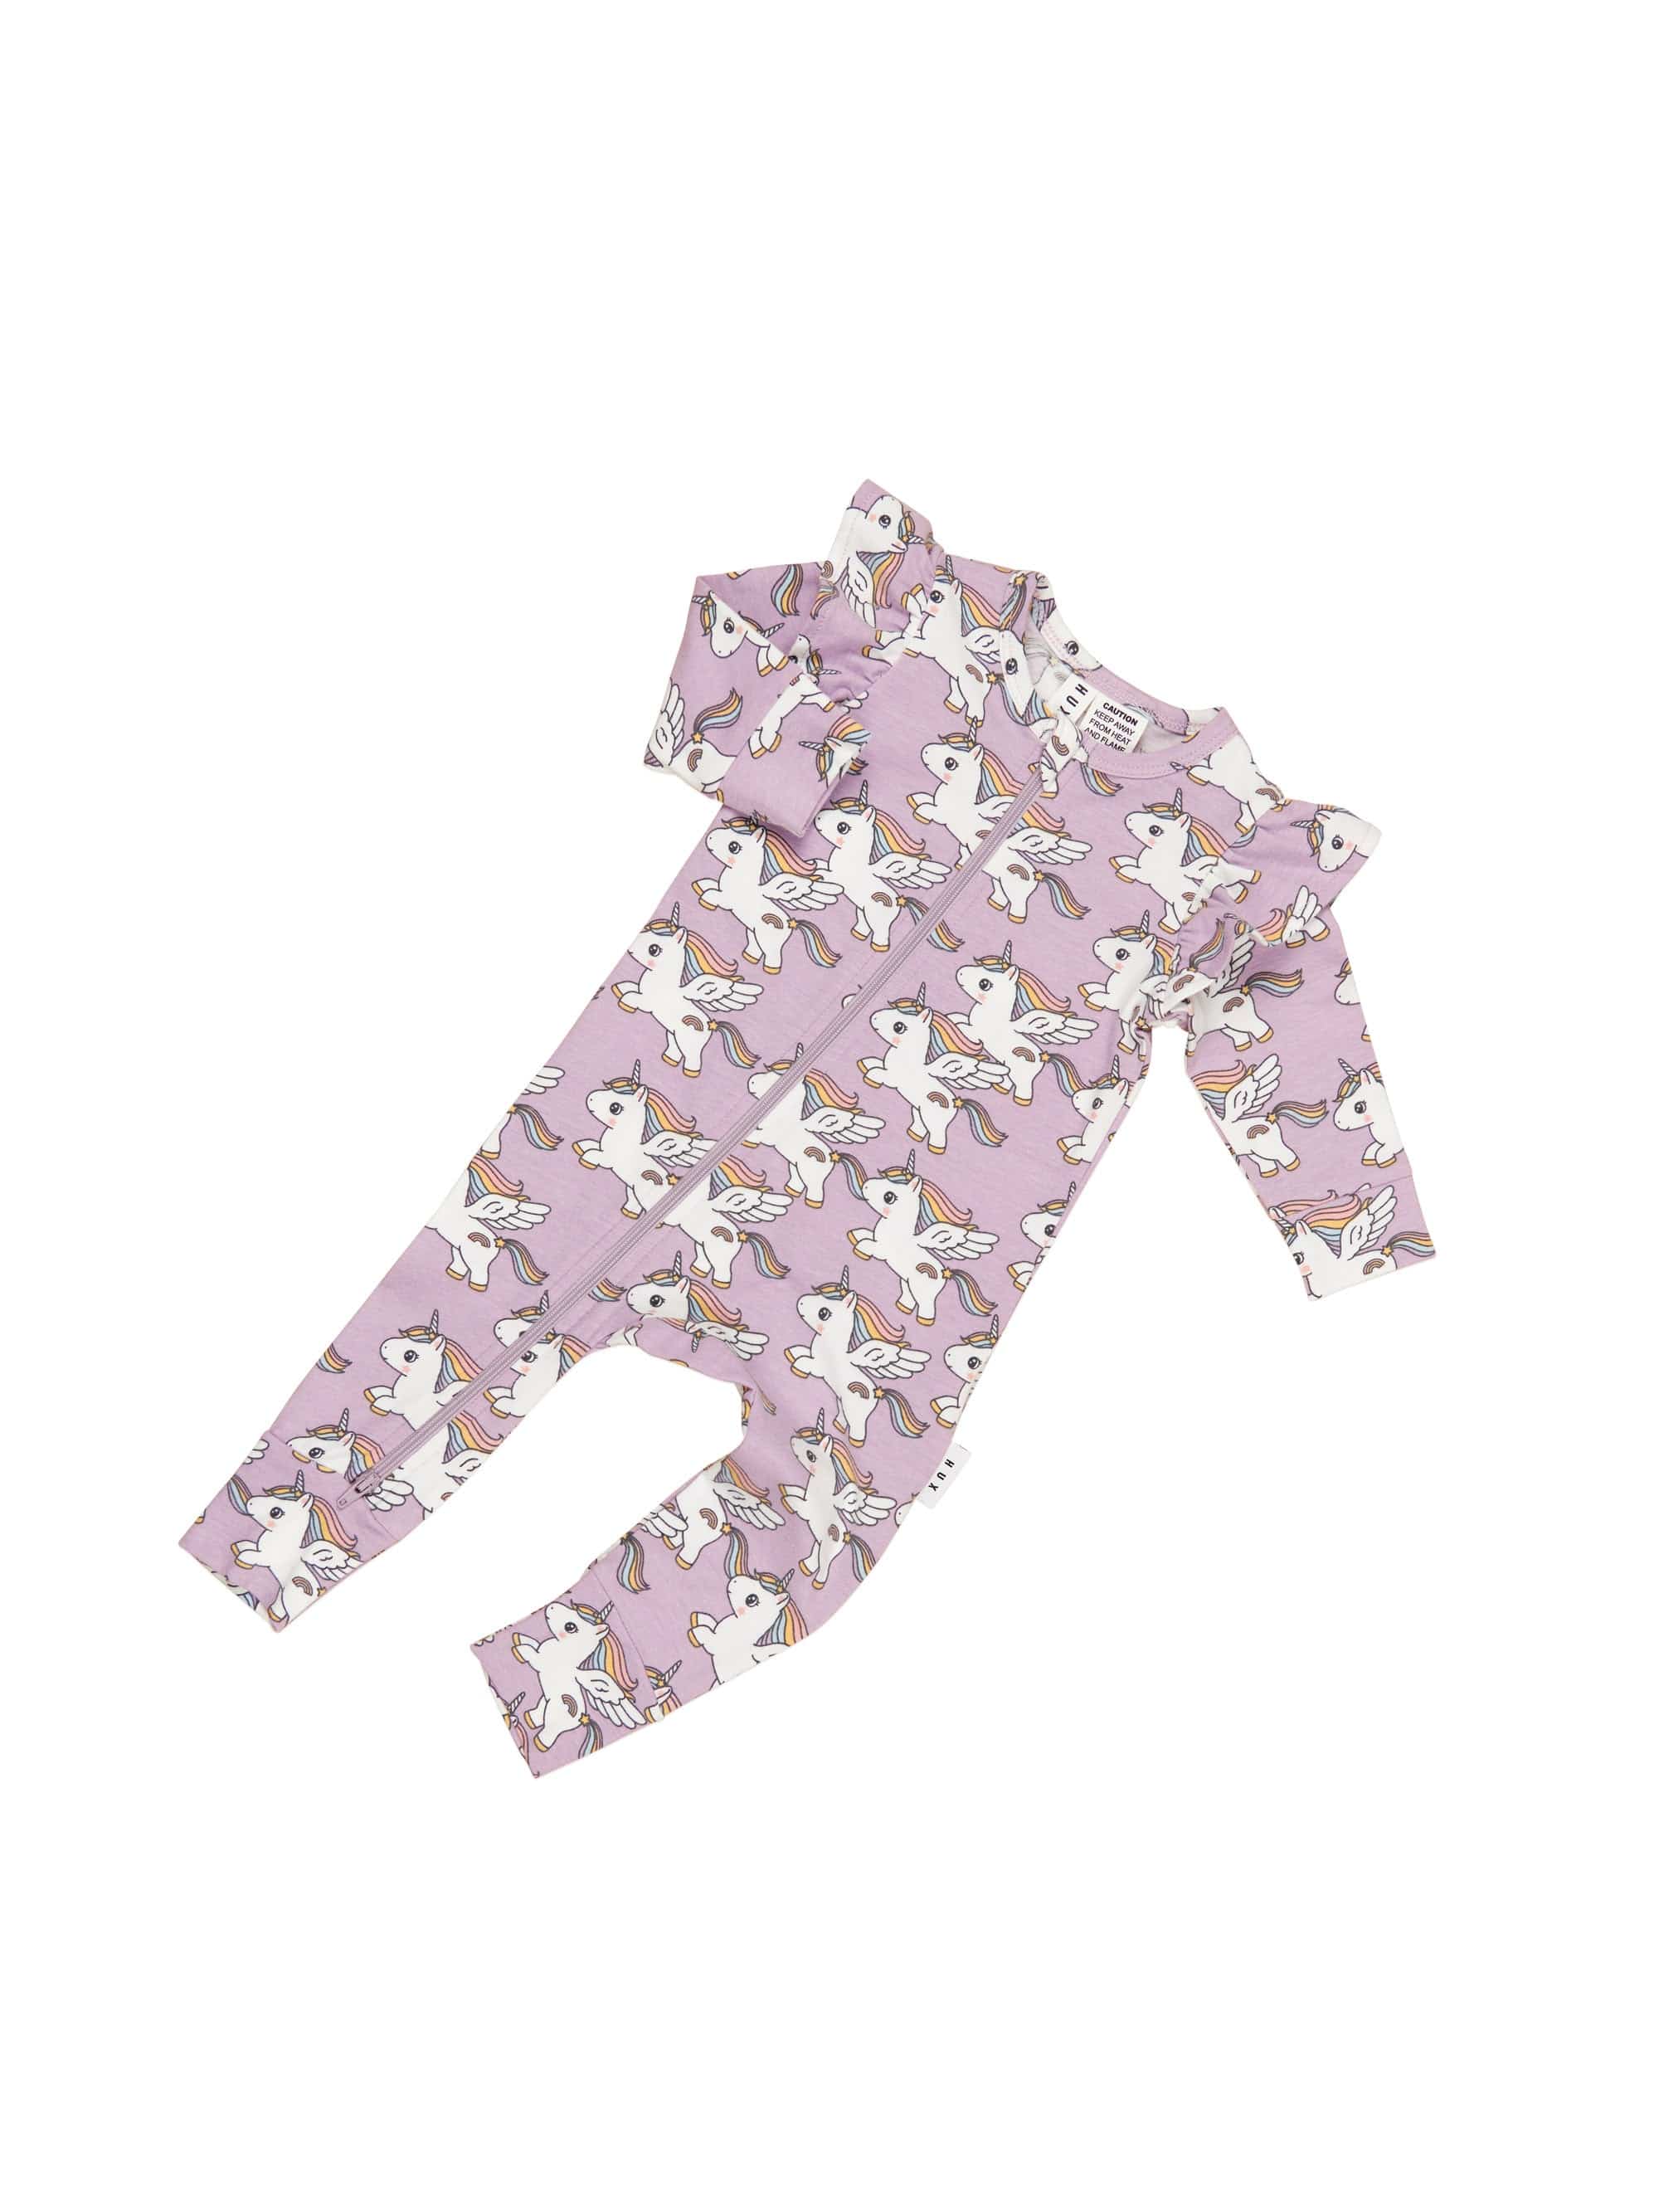 Huxbaby Girls All In One Magical Unicorn Frill Romper